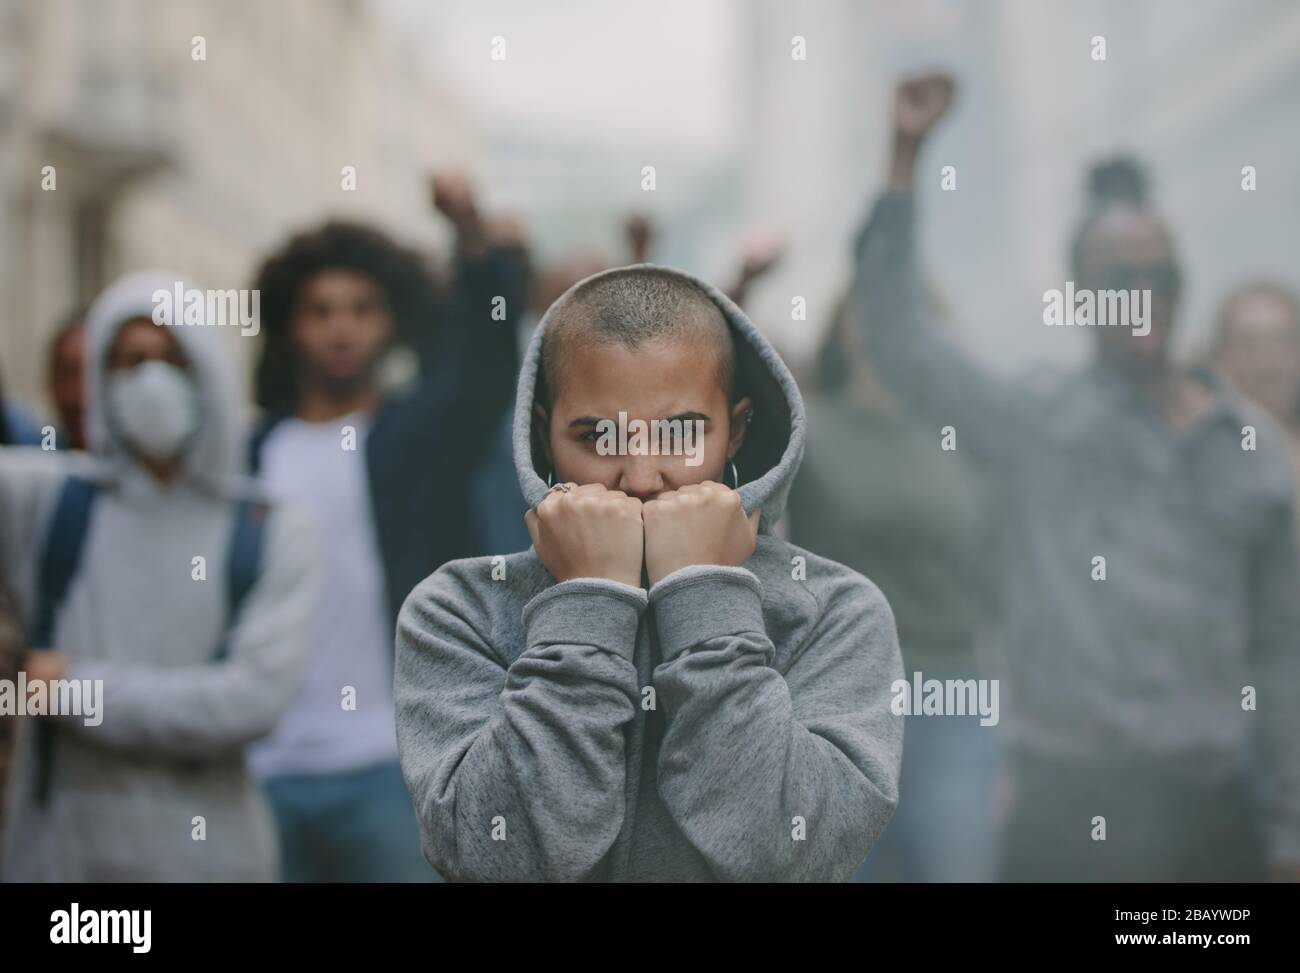 Woman in hooded shirt covering her face with her hands doing a silent protest. Group of social activists protesting silently Stock Photo